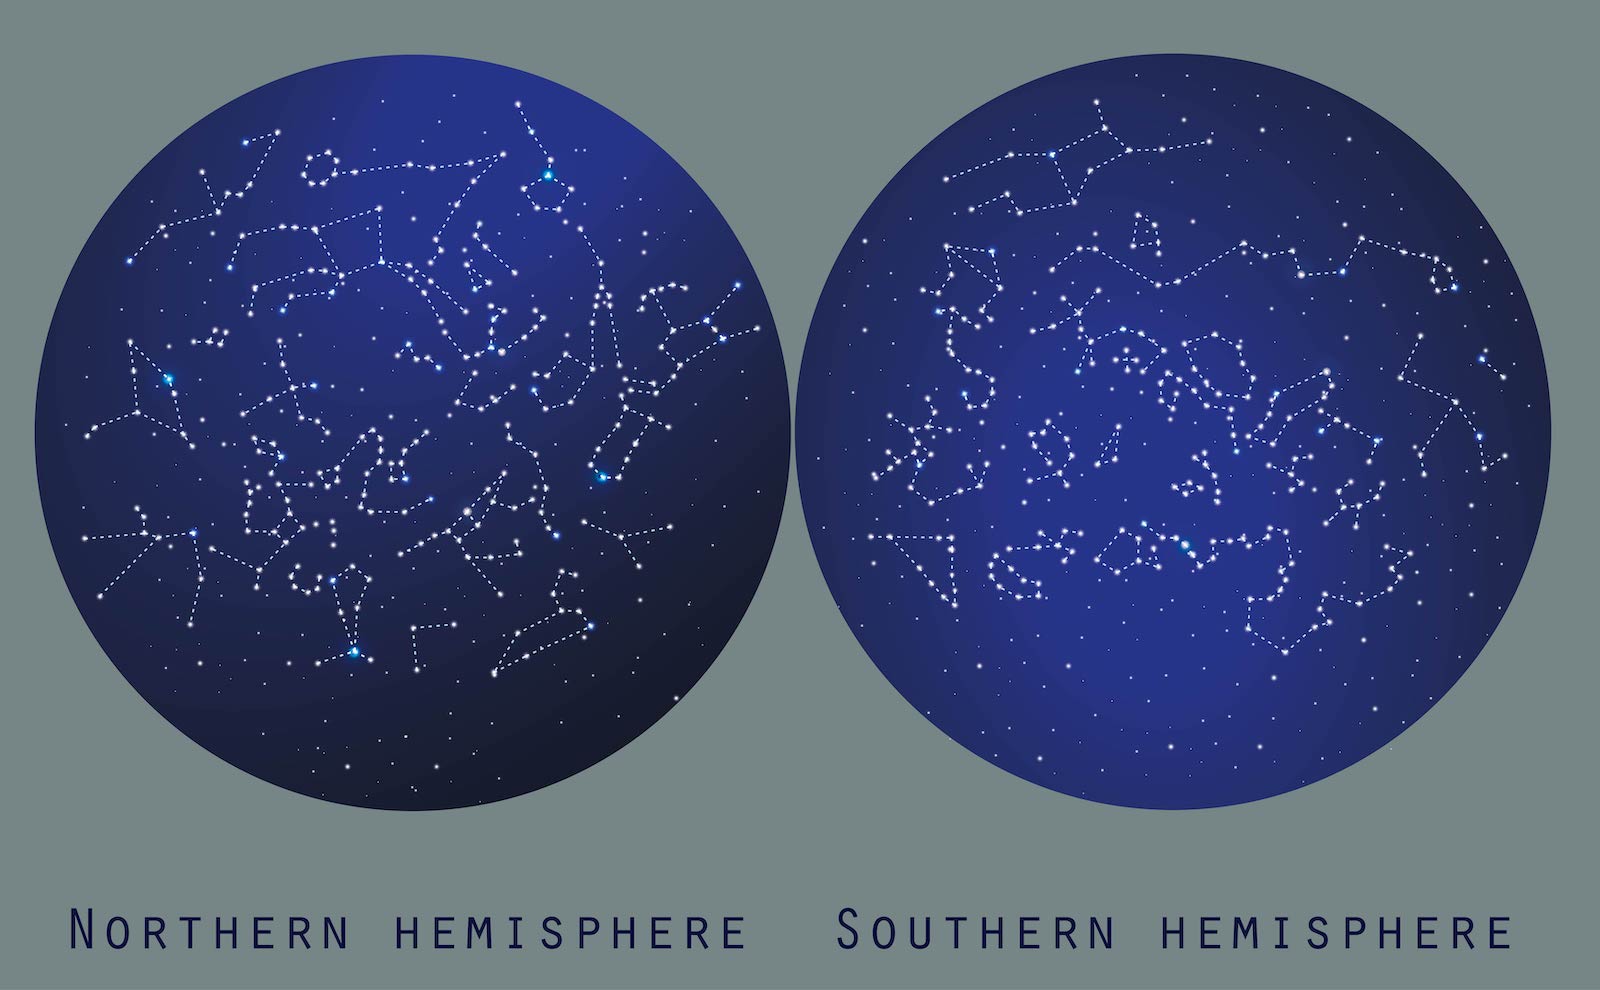 Two images of the night sky in the northern and southern hemispheres.